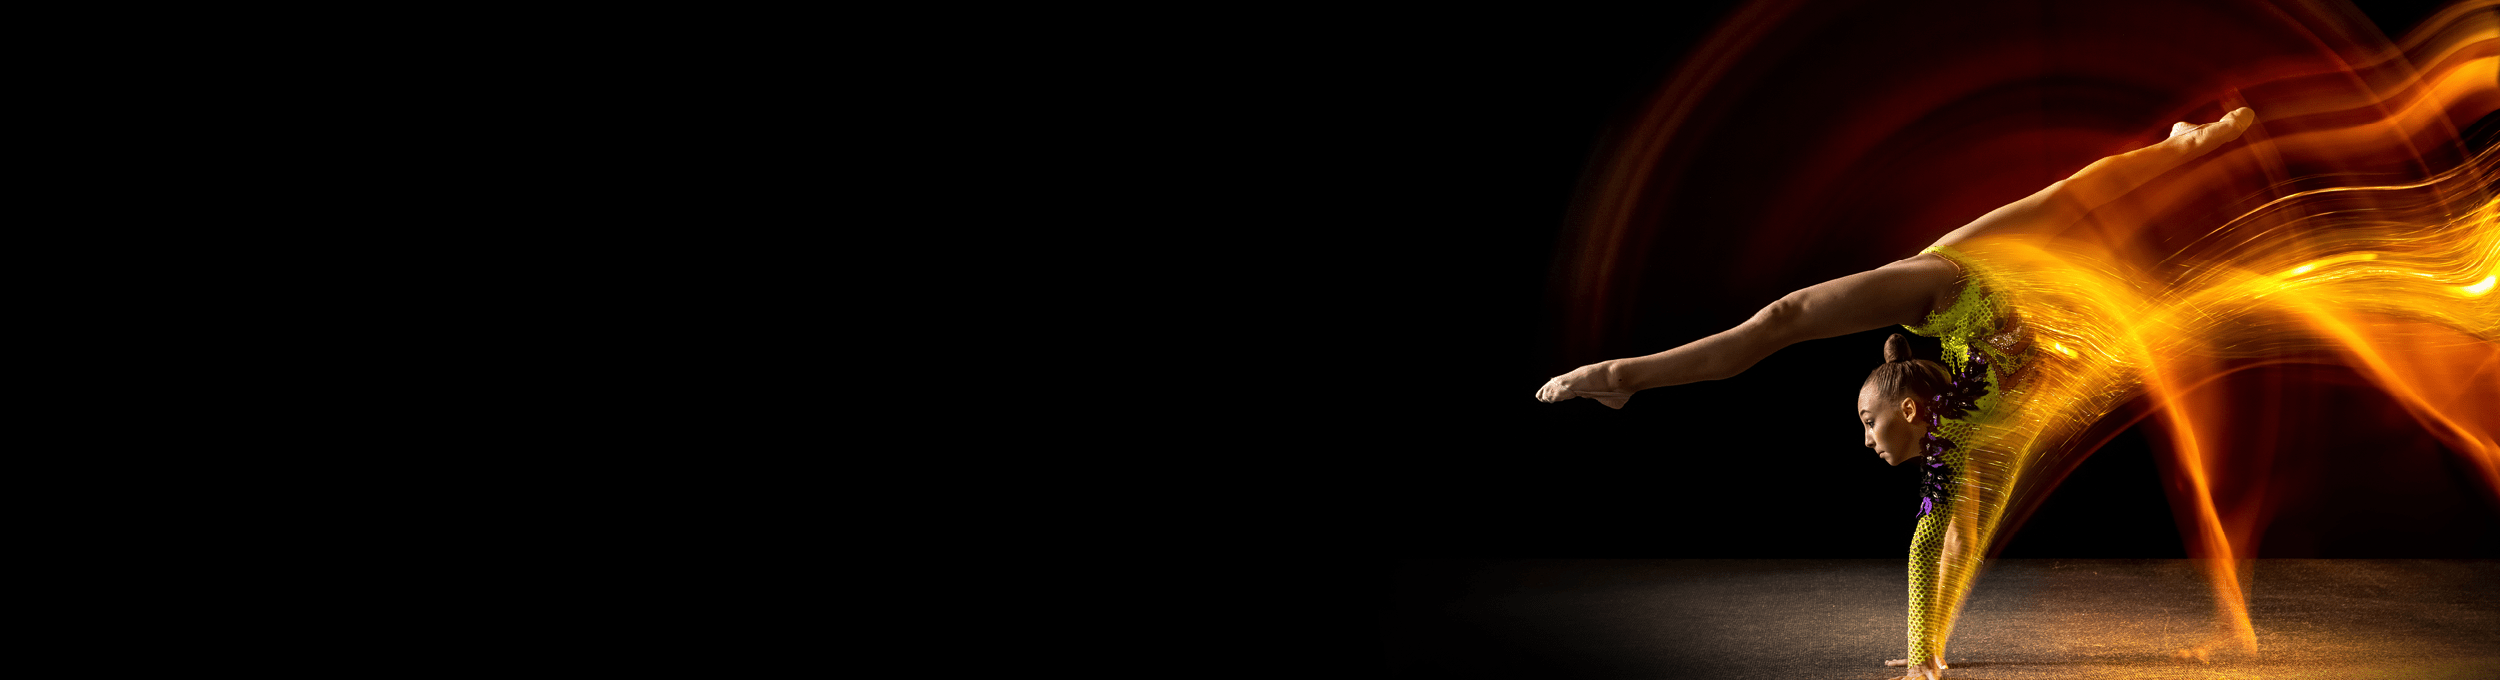 Portrait of young girl, rhythmic gymnastics artist in action isolated on dark studio background with mixed light. Concept of sport, action, aspiration, beauty. Handstand with legs in split position.